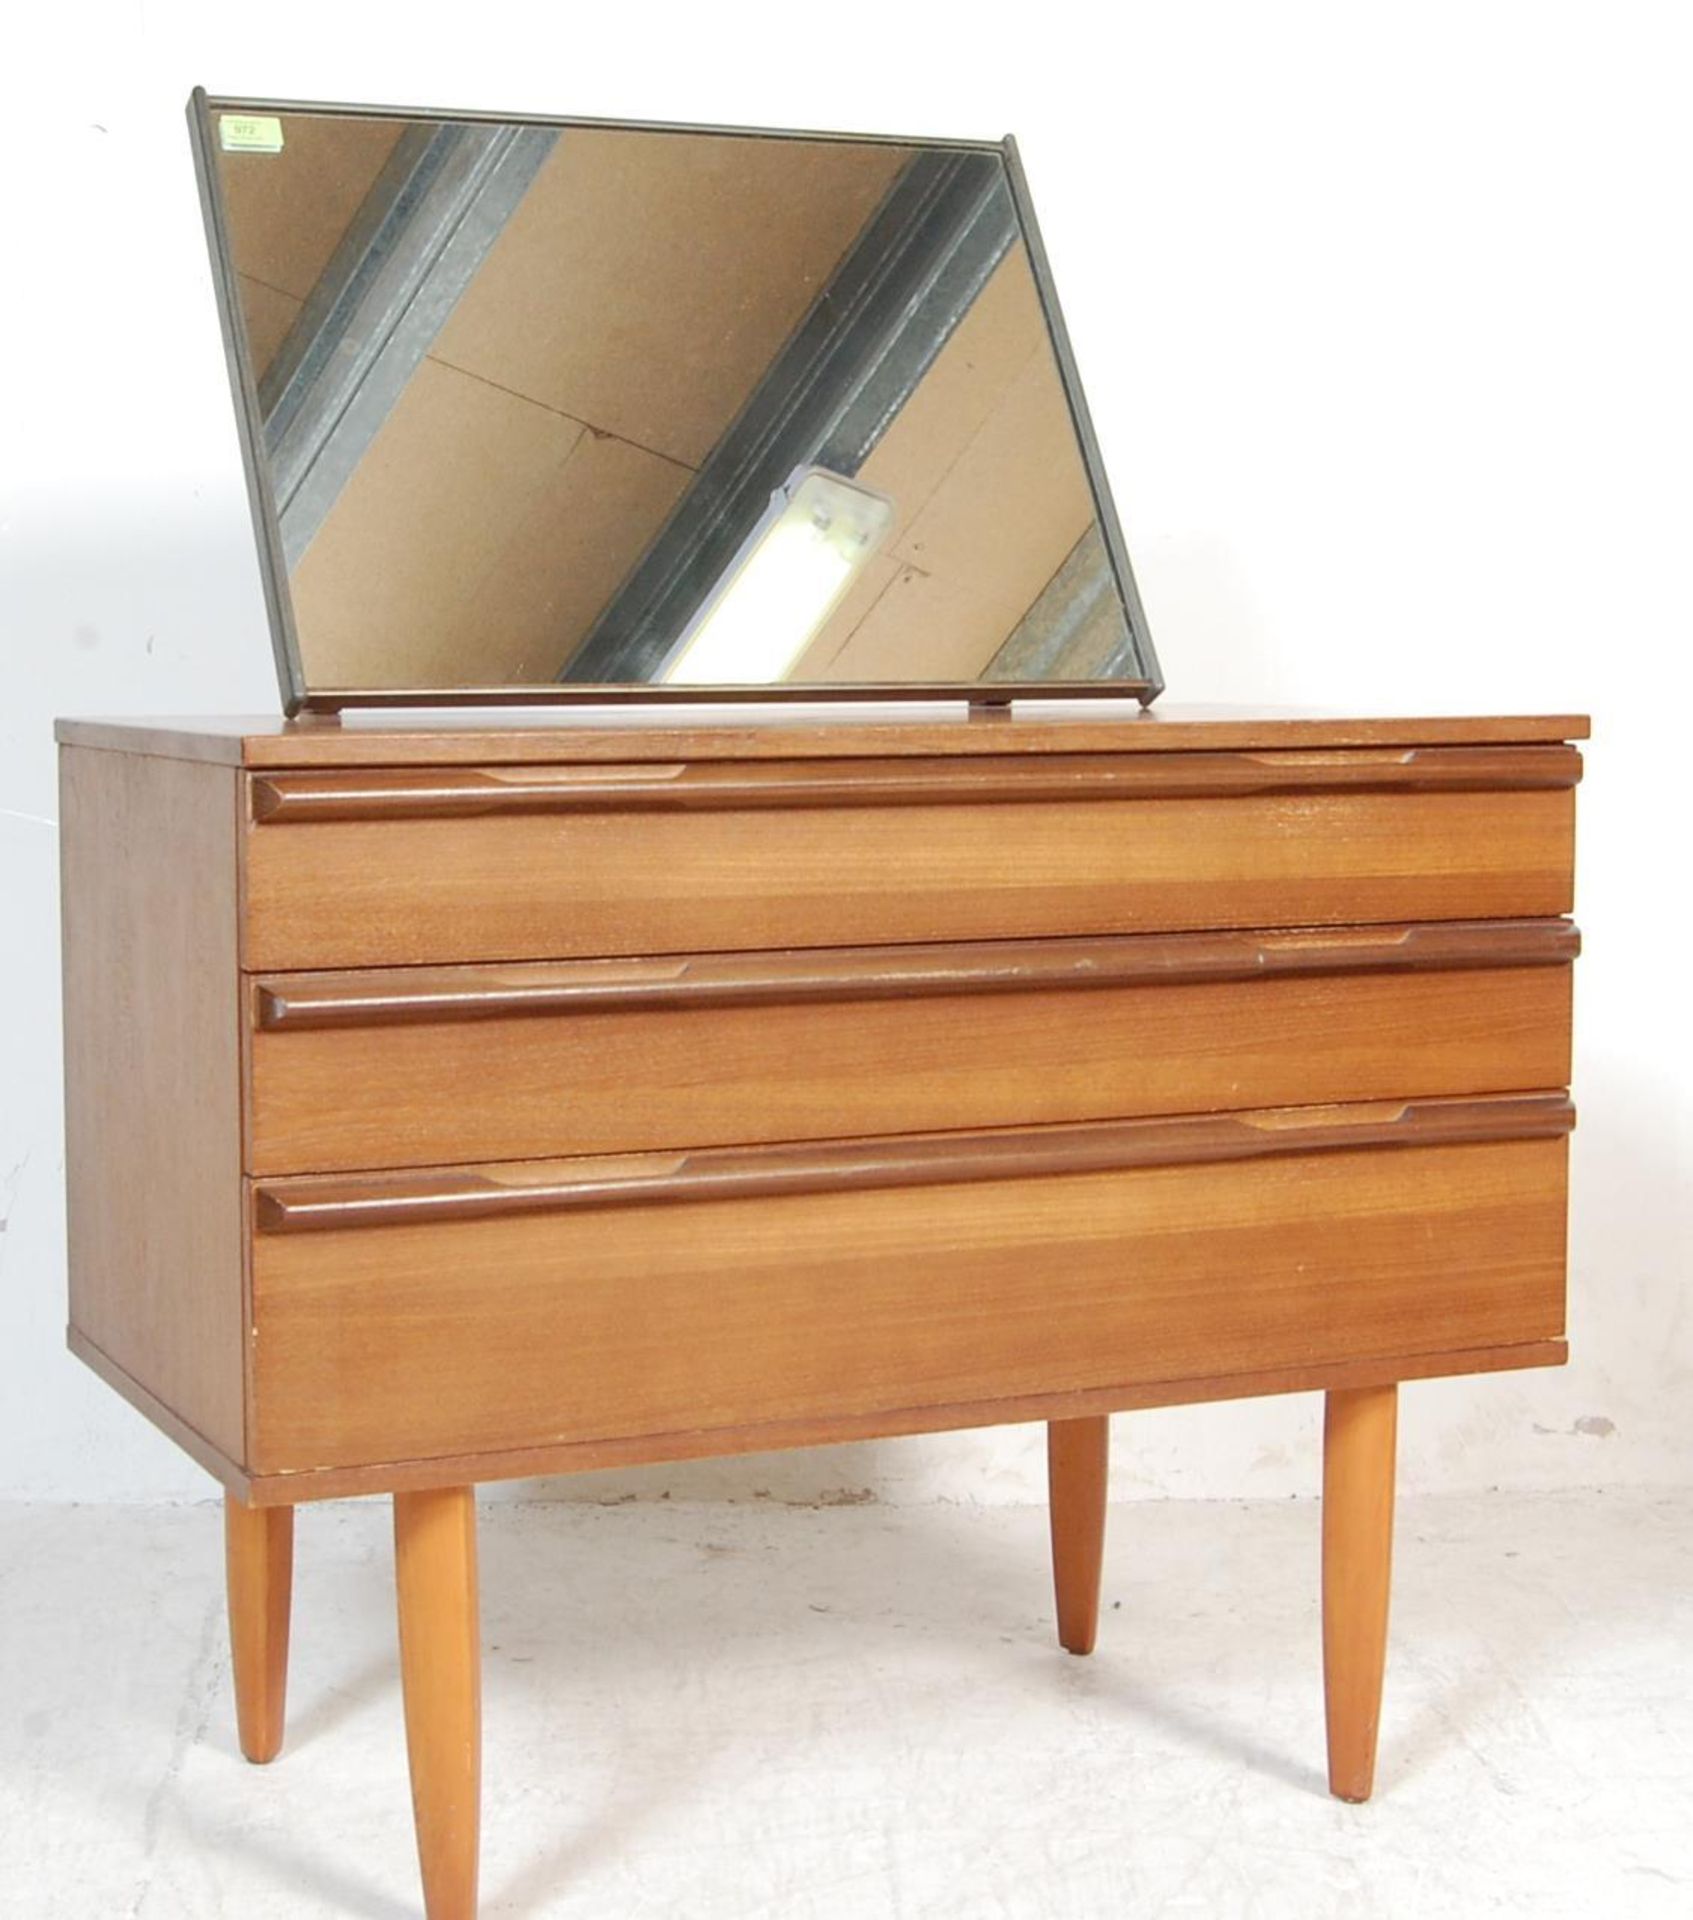 VINTAGE 20TH CENTURY TEAK WOOD DRESSING TABLE CHEST BY AVALON